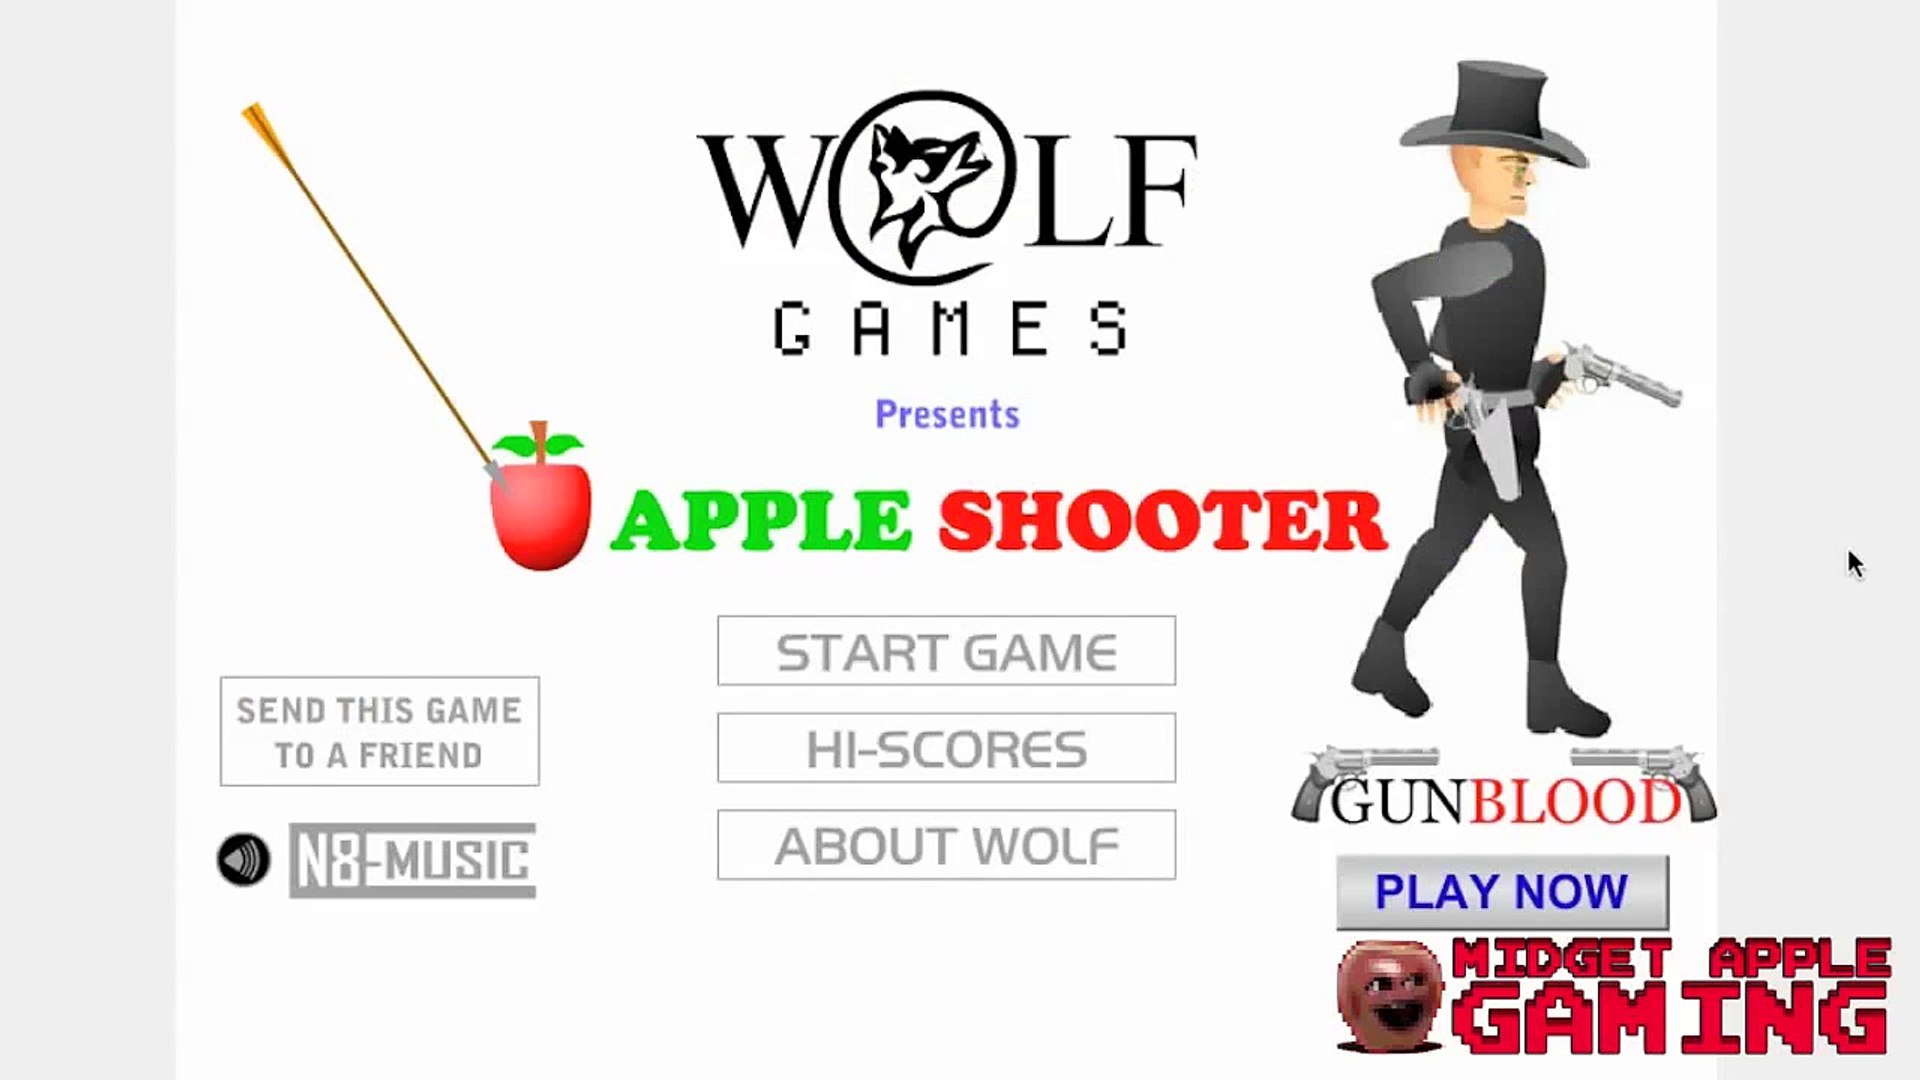 apple shooter wolf games